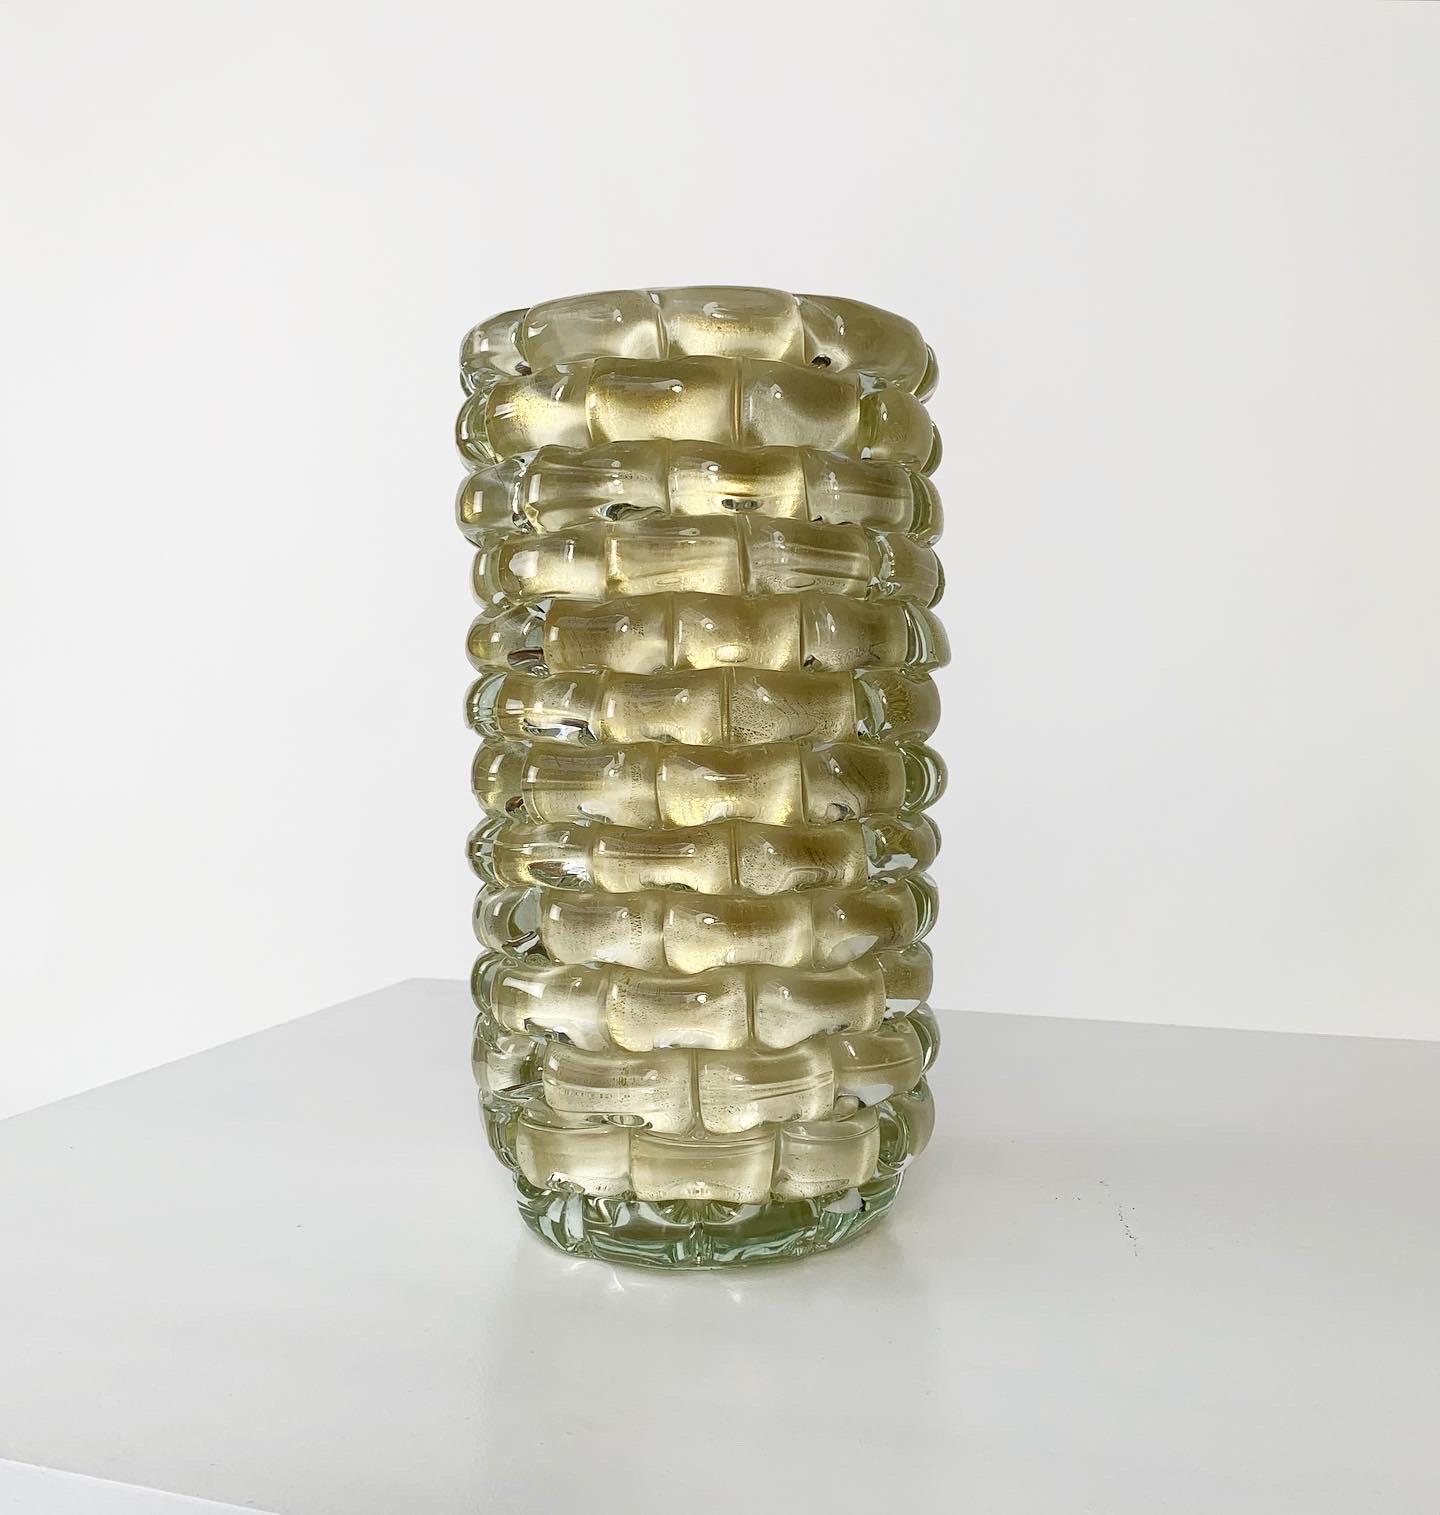 Beautiful heavy Murano glass vase by Cenedese, hand-crafted in Italy in the 1980s. Cream colored interior with applied glass pieces over gold foil, similar to the 'rostrato' technique. 

This piece is signed 